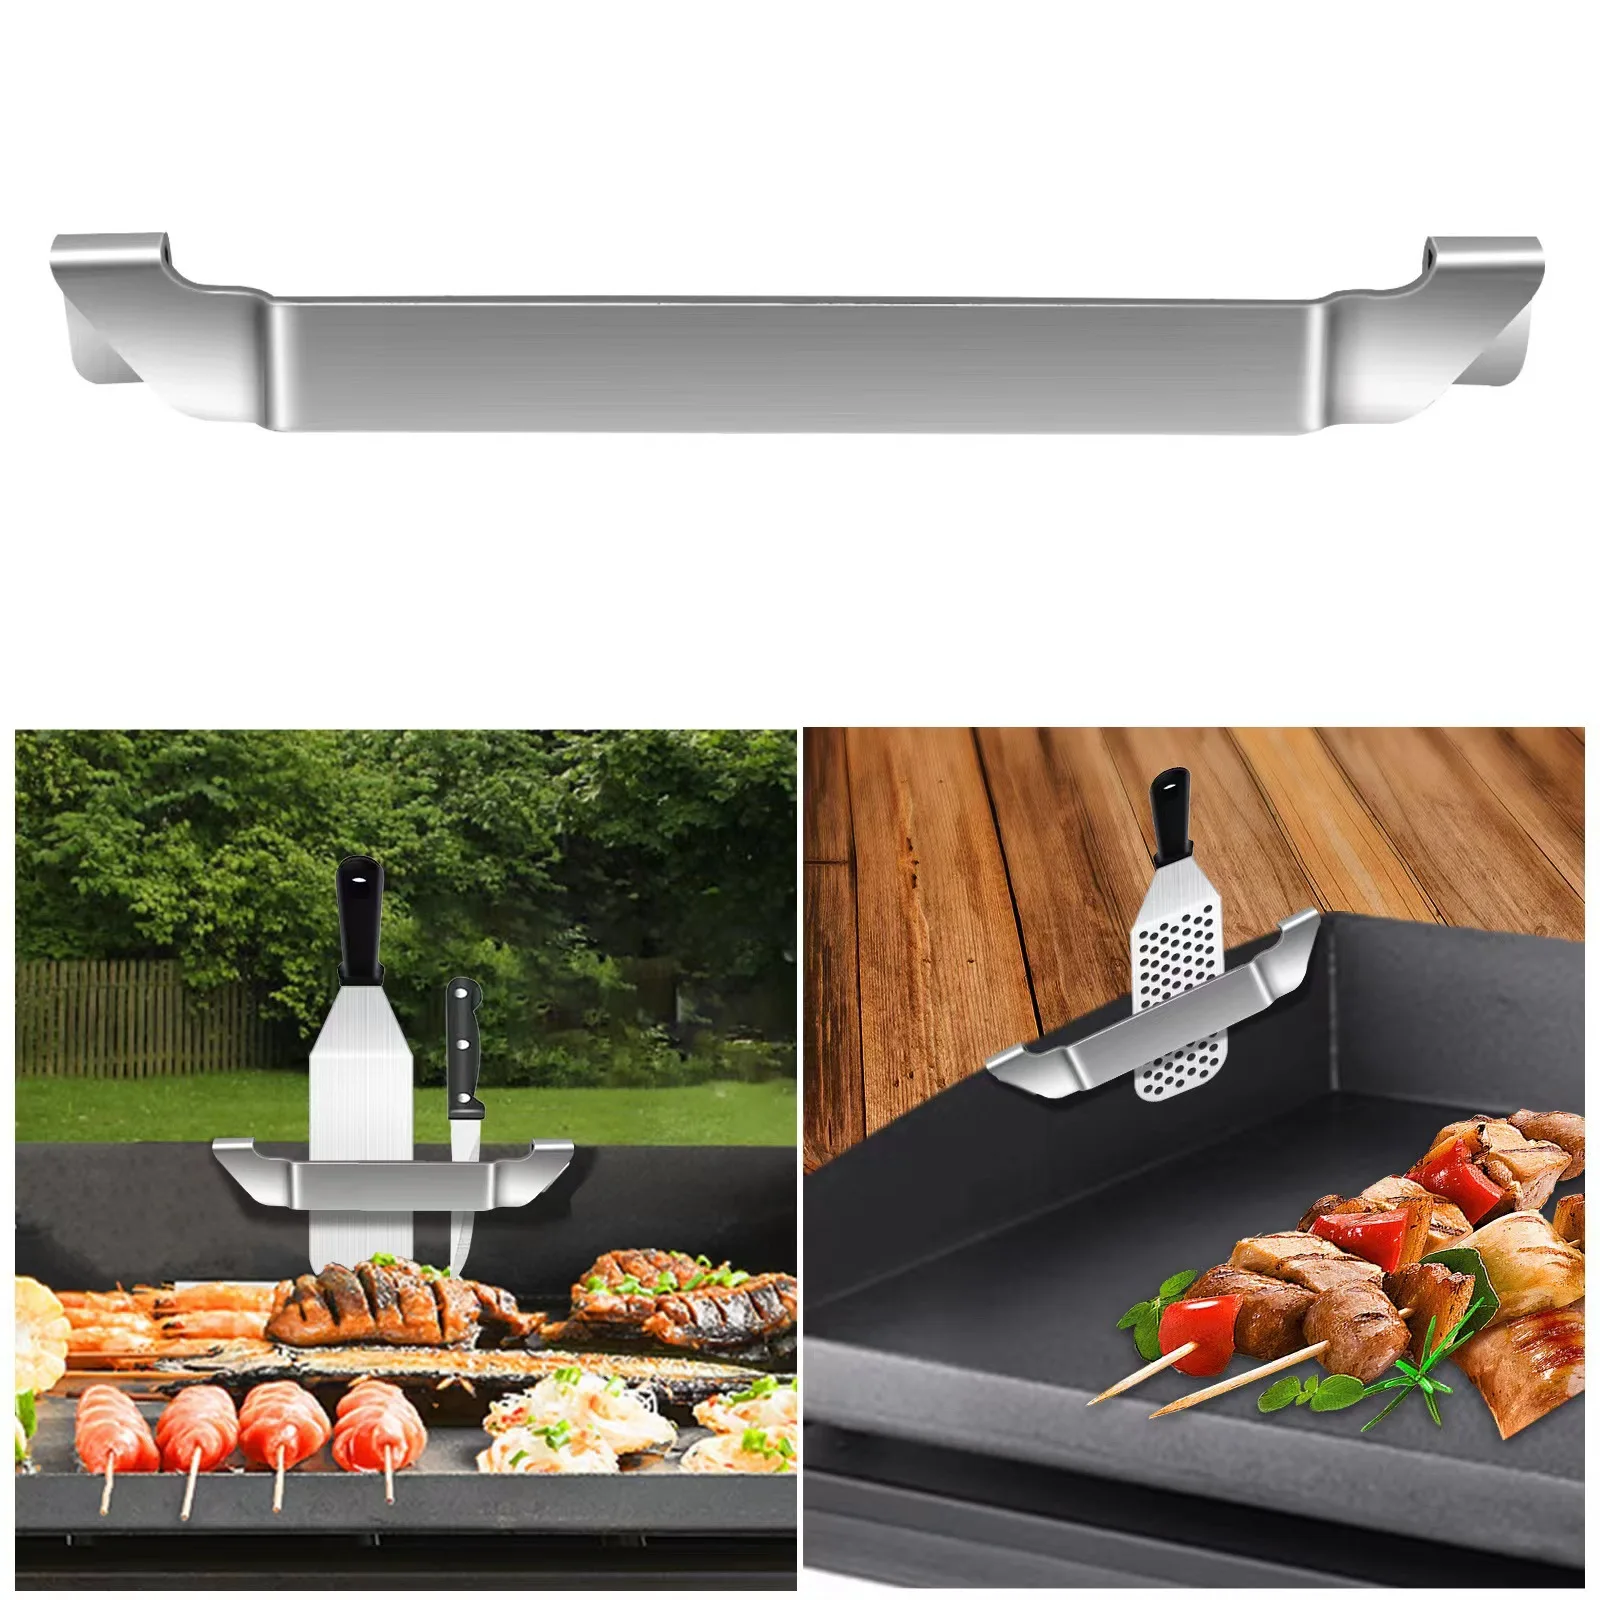 

Blackstone Griddle Spatula Holder Steel Barbecue Tool Hold Rack Griddle Accessories for Blackstone Camp Chef Flat Top Griddle